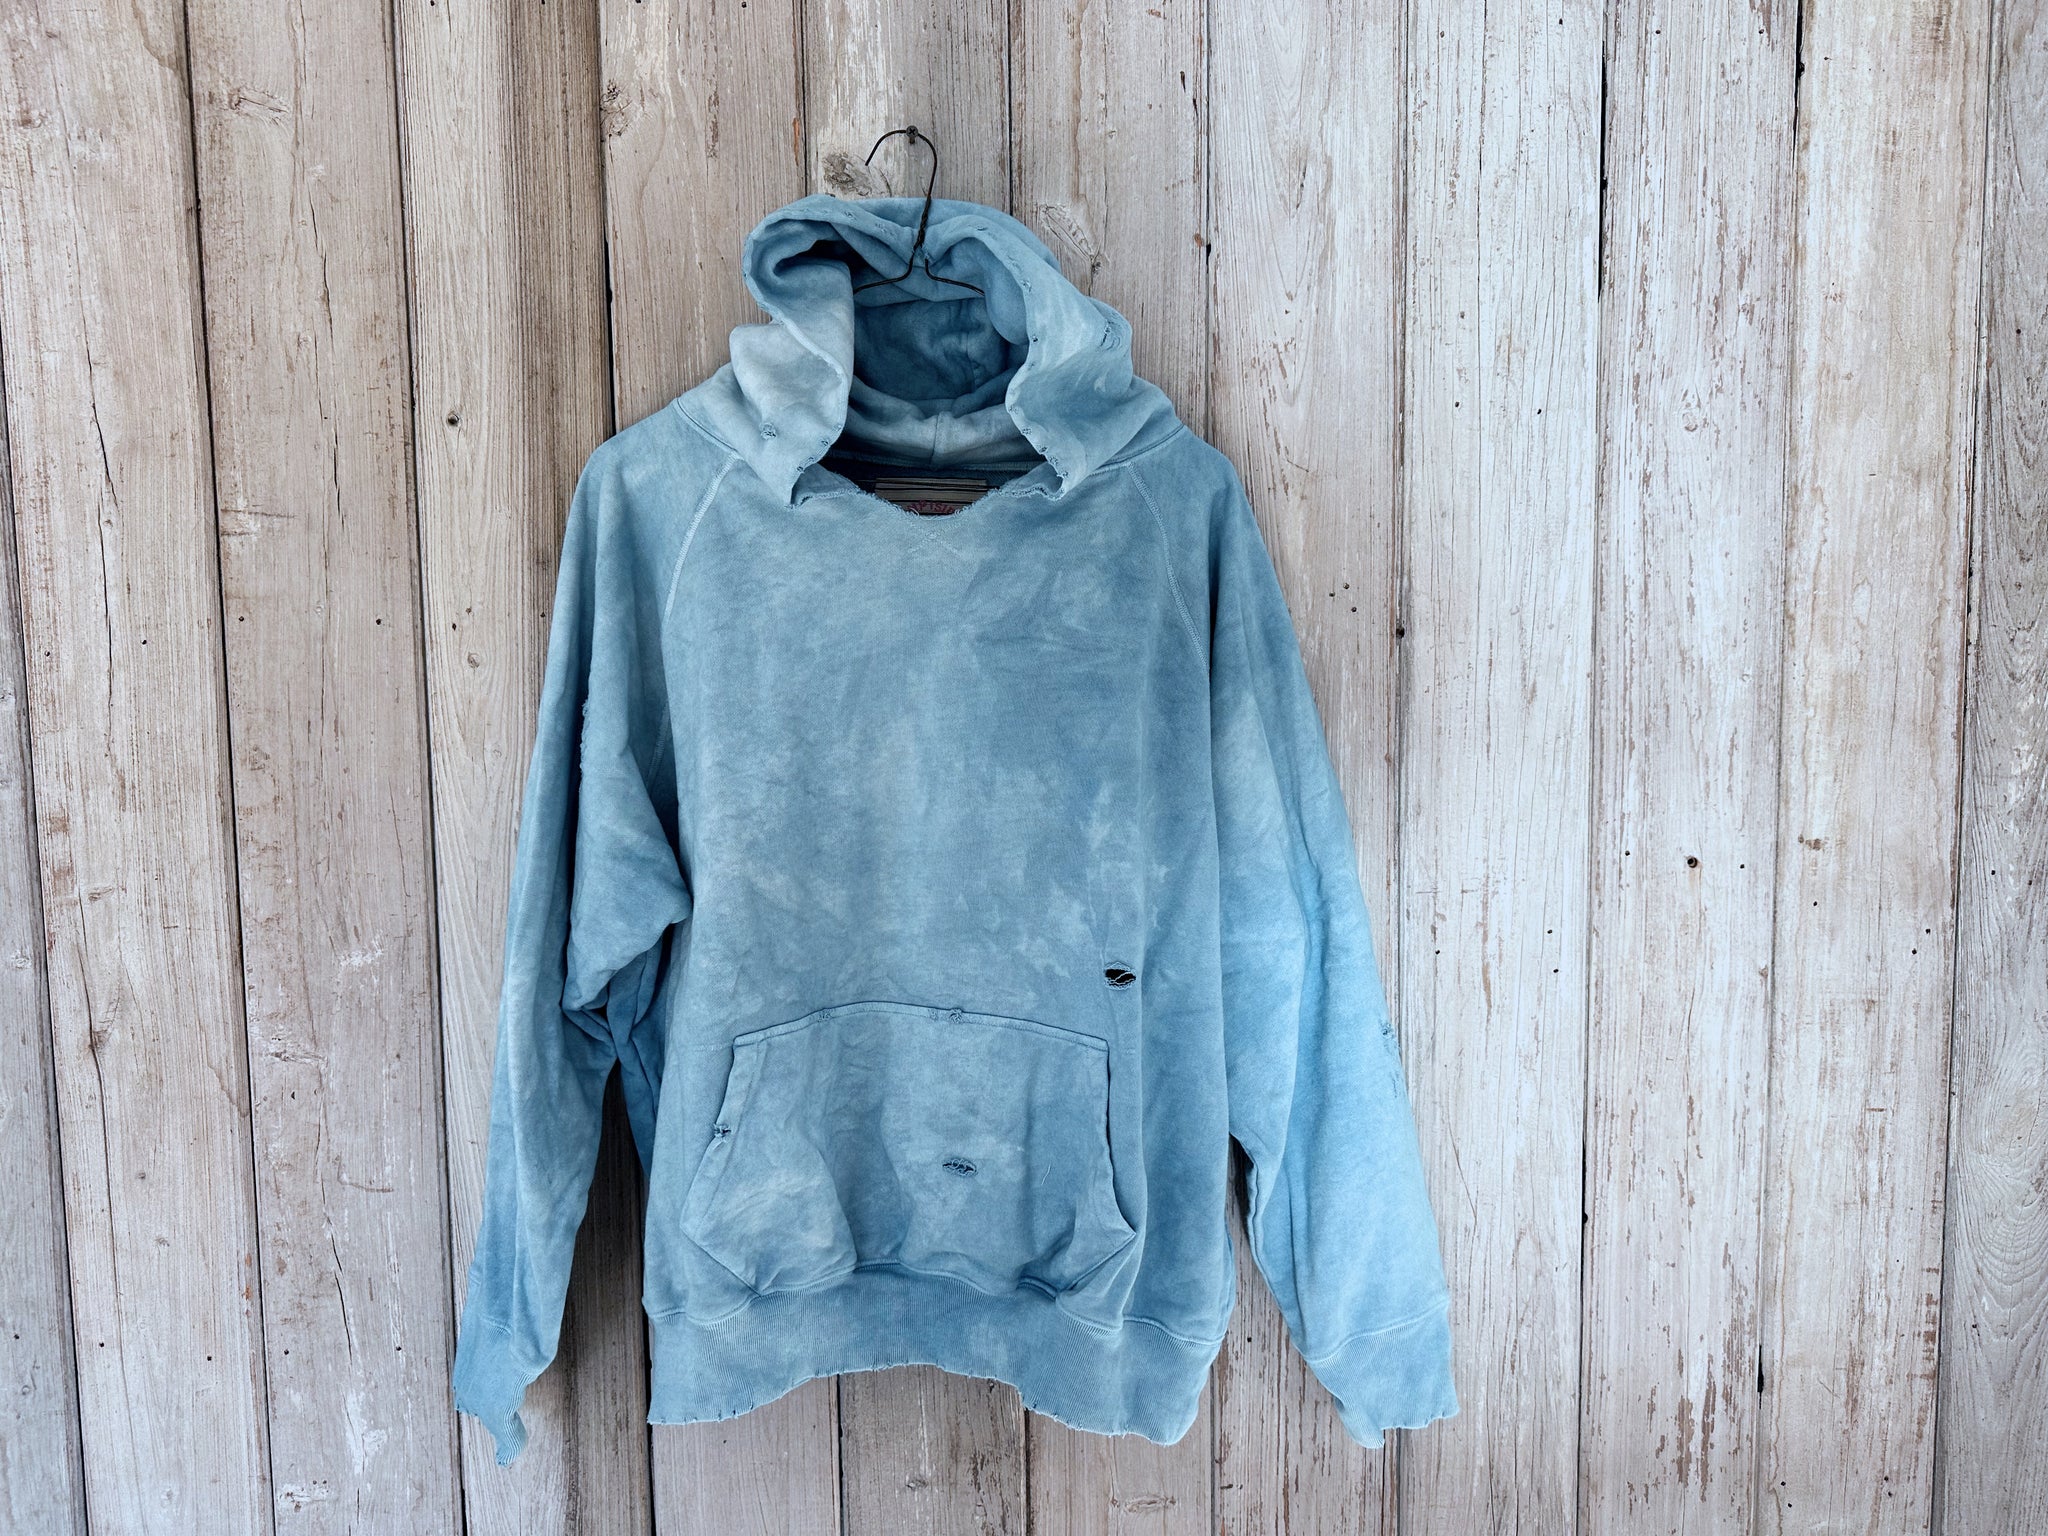 New Indigo Dyed Camp Counselor Hoodie